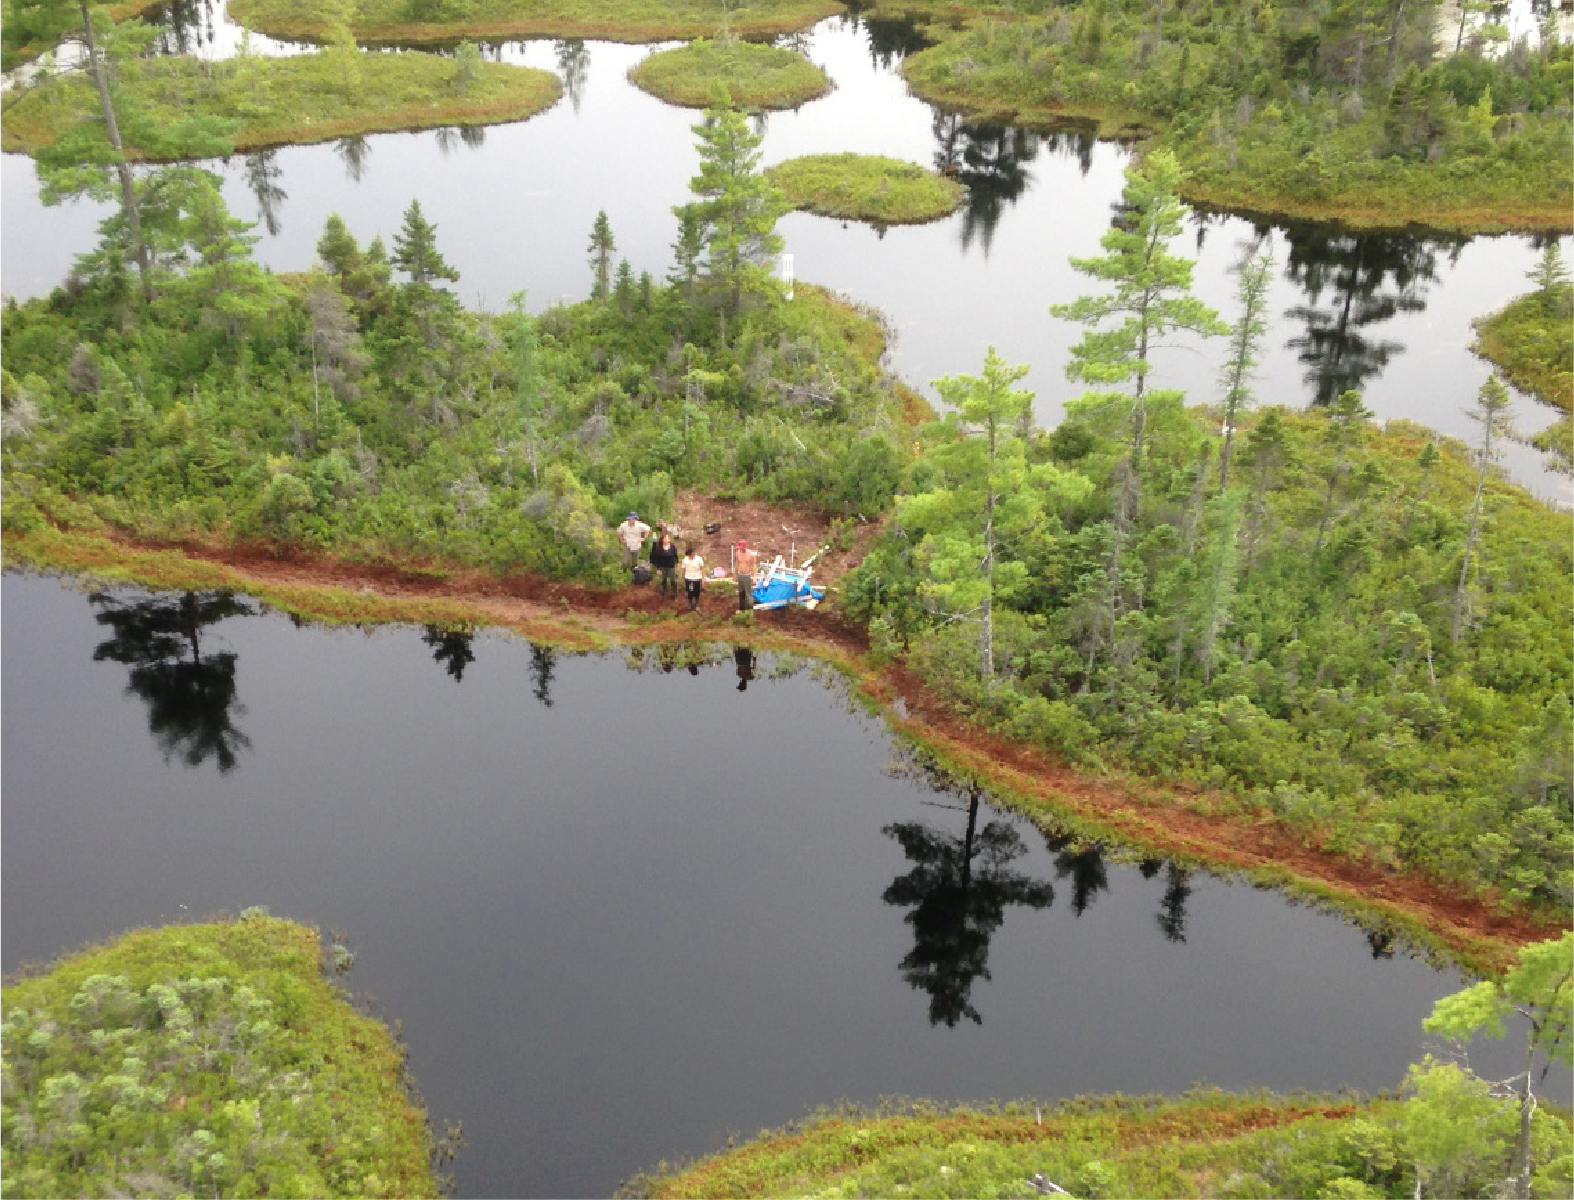 bog - water and green plants